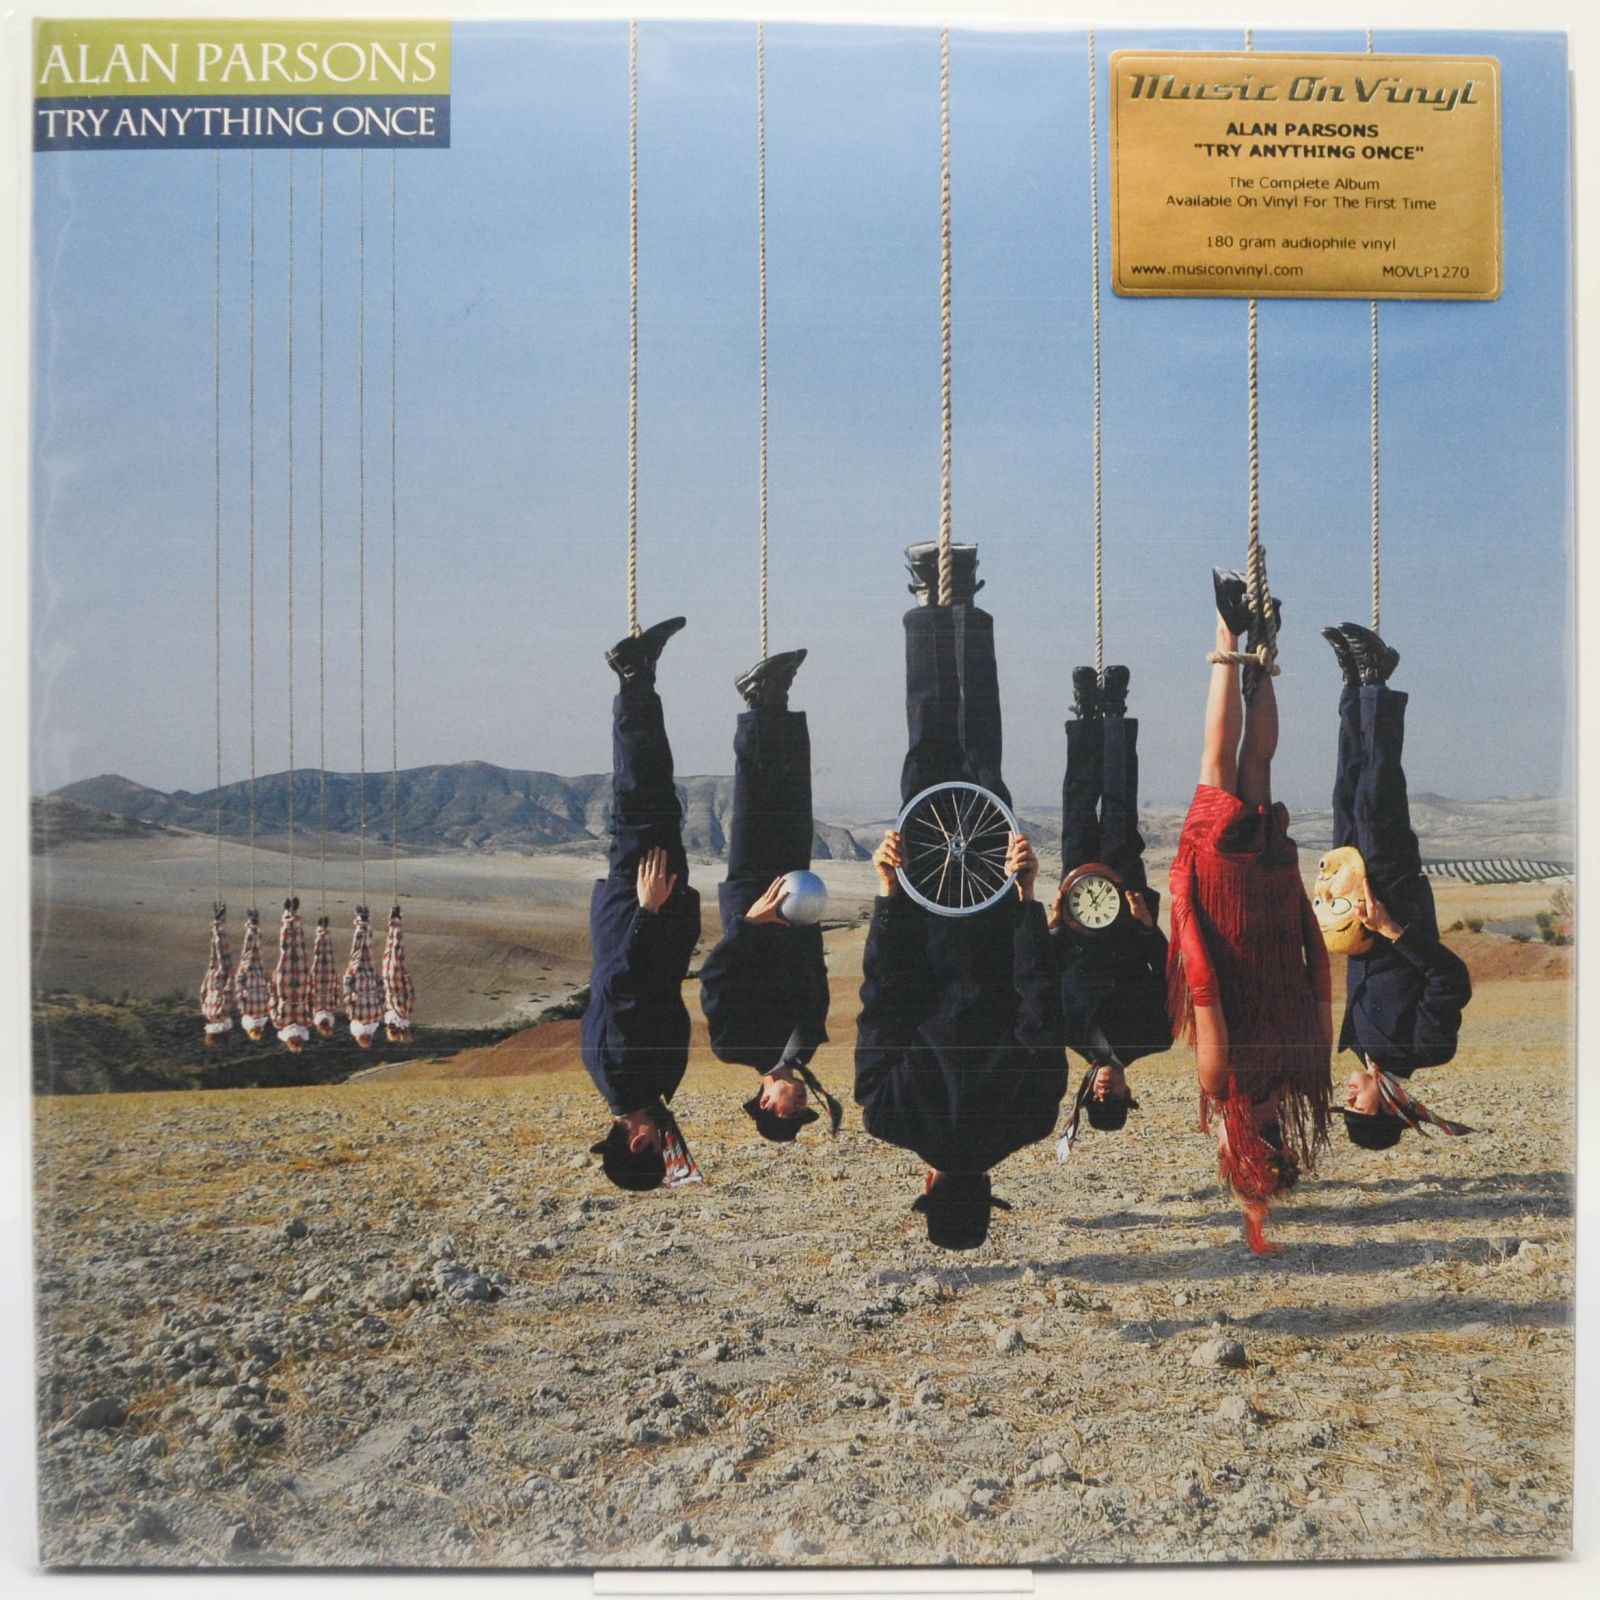 Alan Parsons — Try Anything Once (2LP), 1993